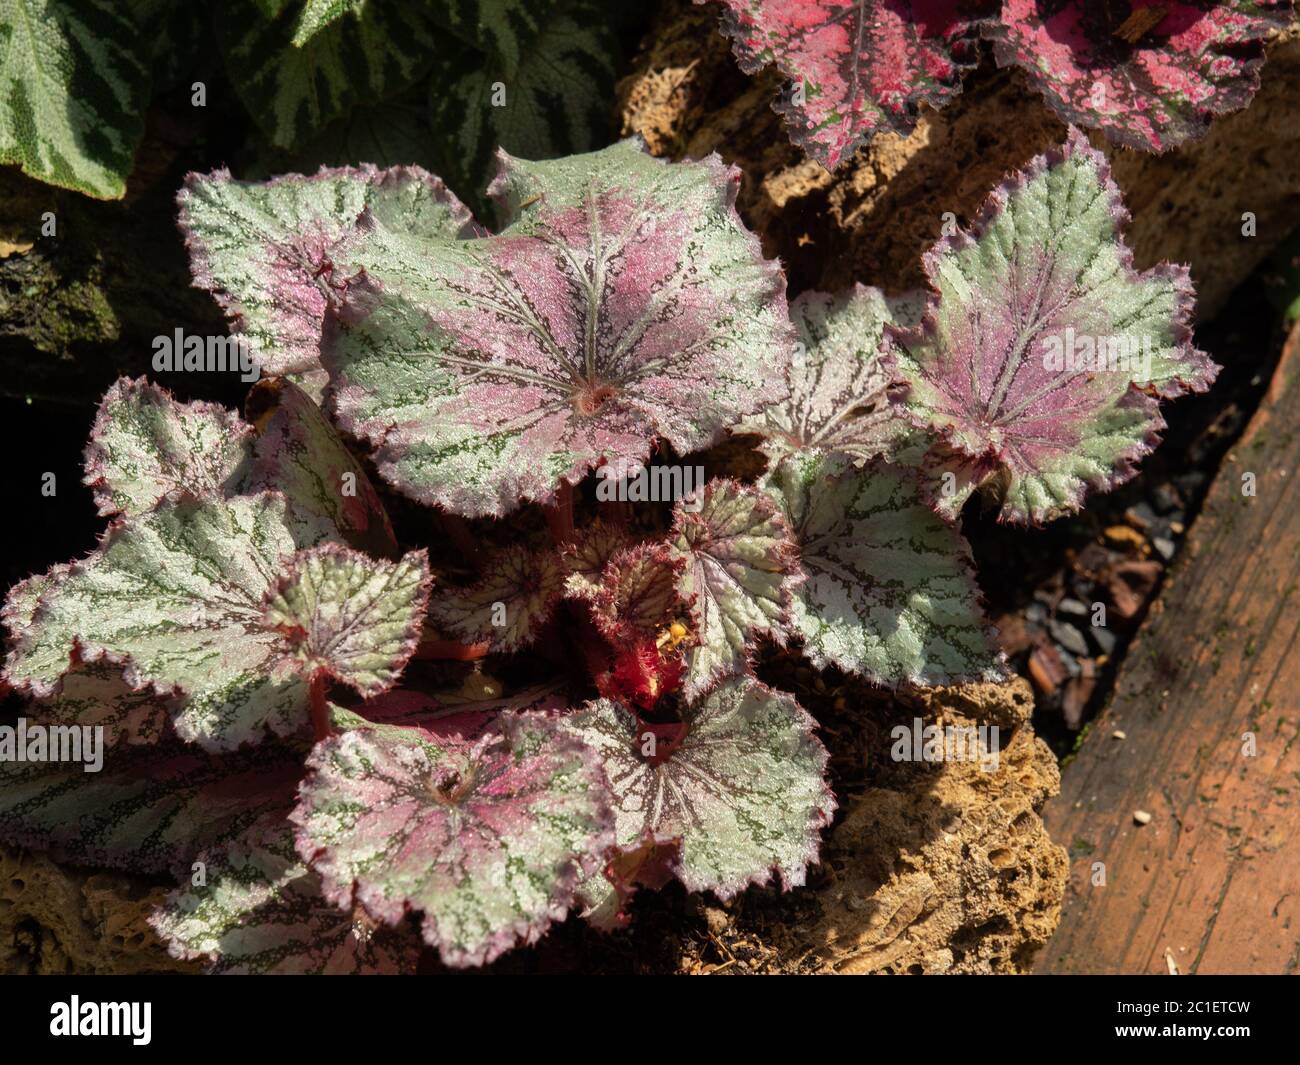 Beautiful color of Begonia Rex, one of the most popular indoor plant, suit for desk or tabletop decoration. Stock Photo